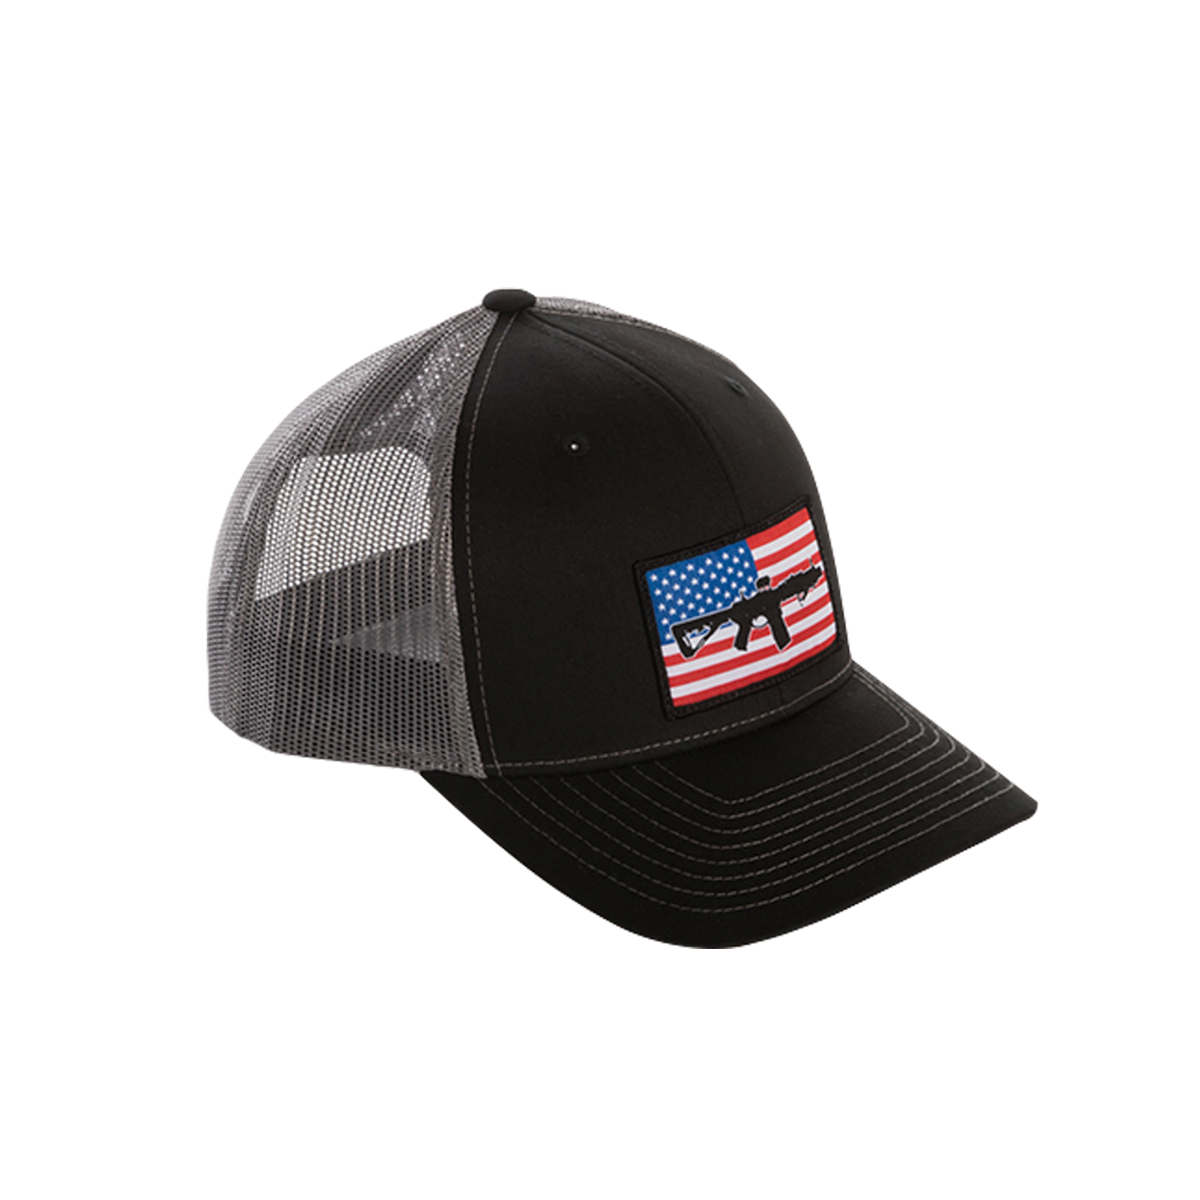 All Mesh Black American Flag Cap Structured